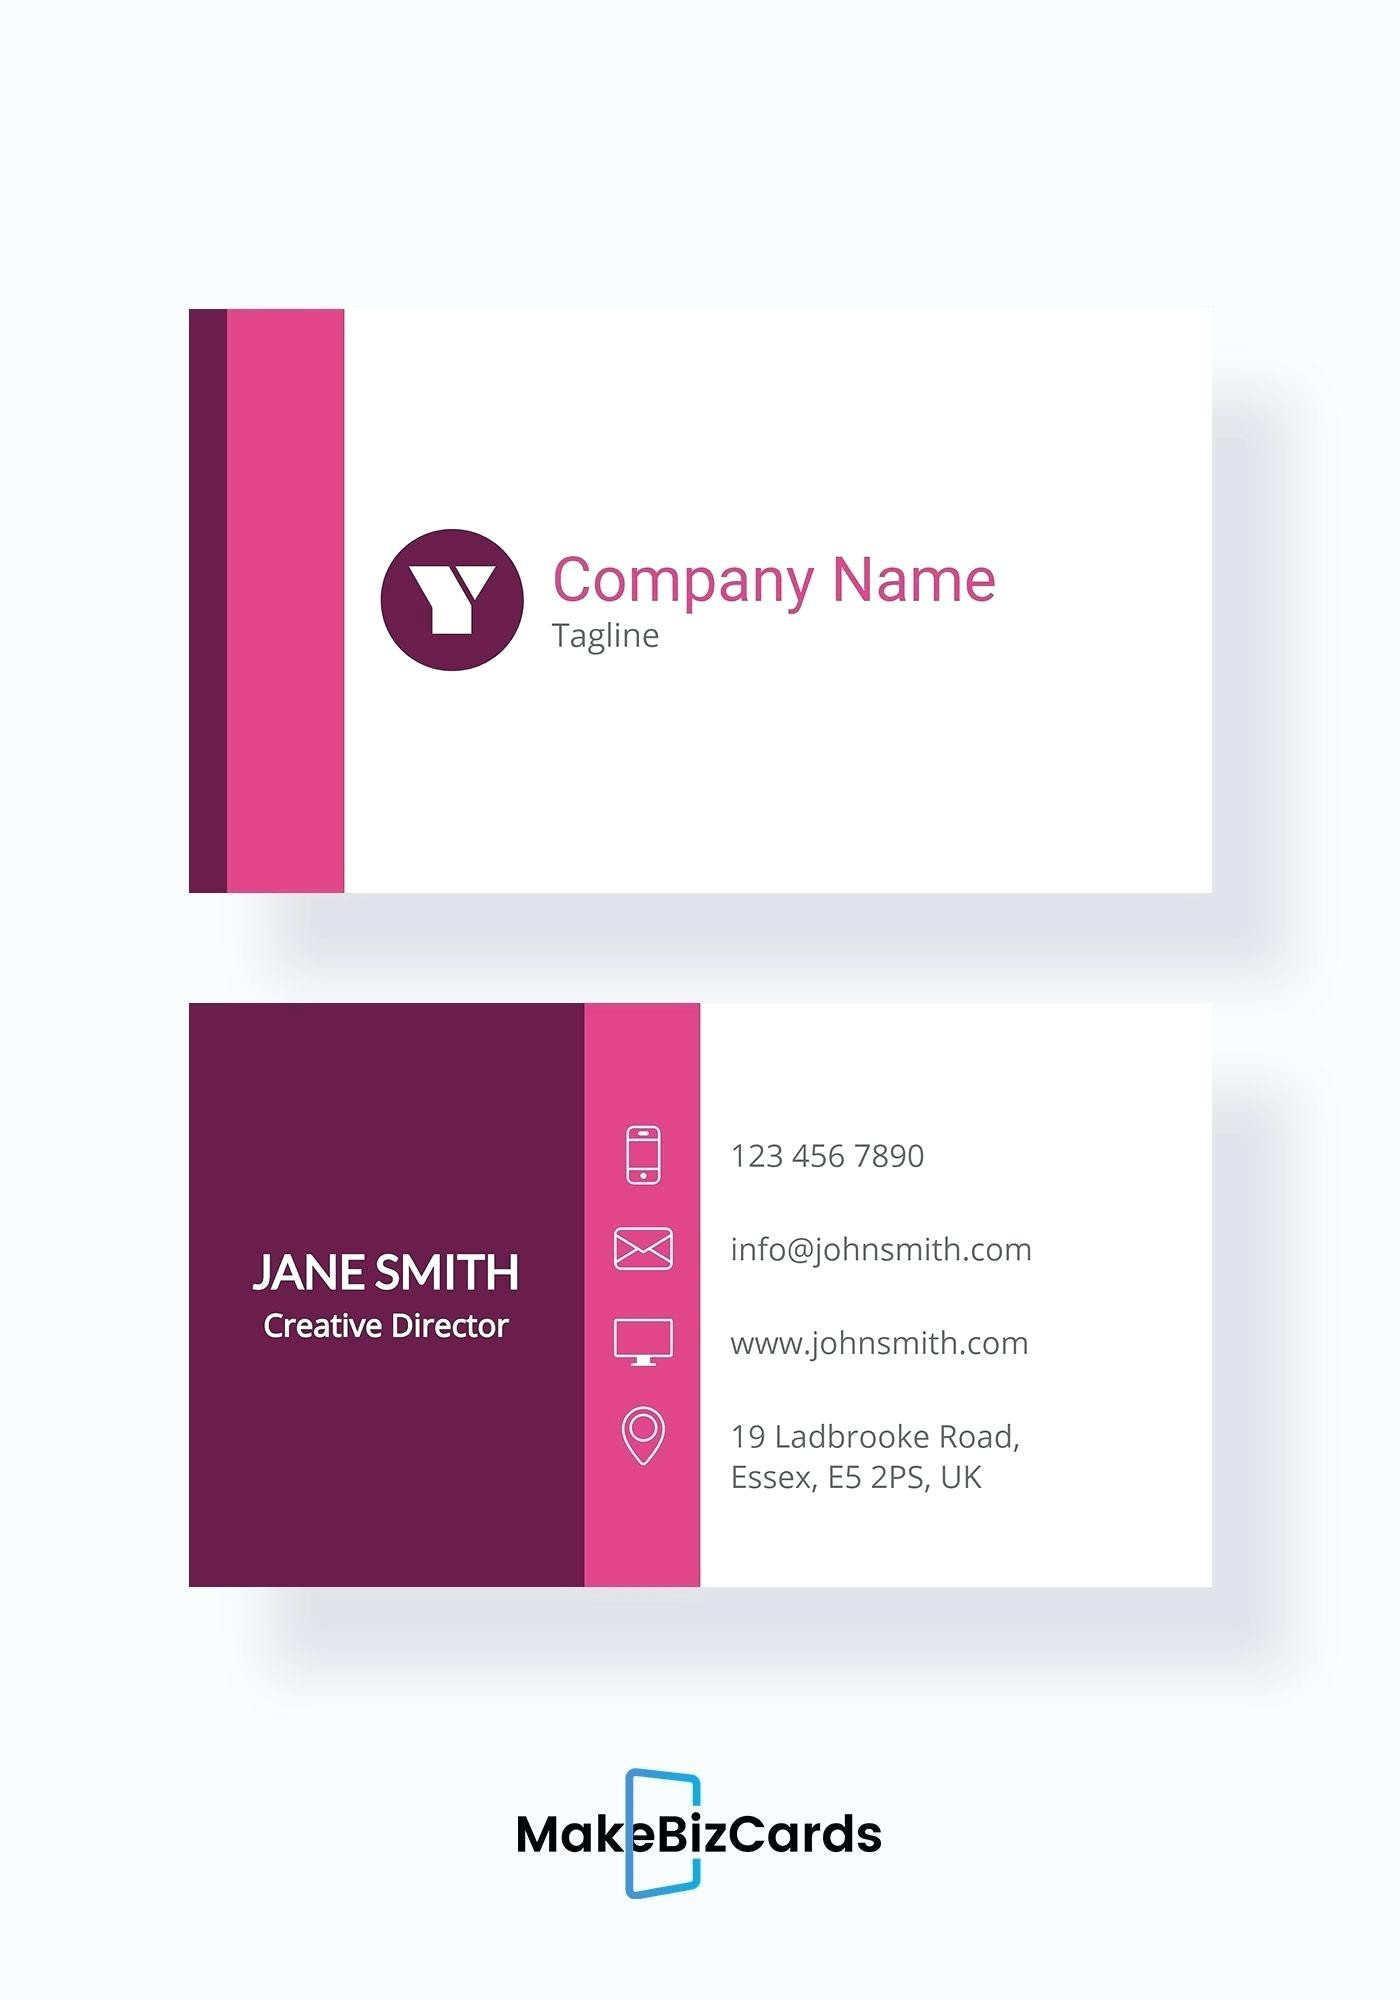 Legal Business Cards Template Free – Wovensheet Of Business Calling Card Template